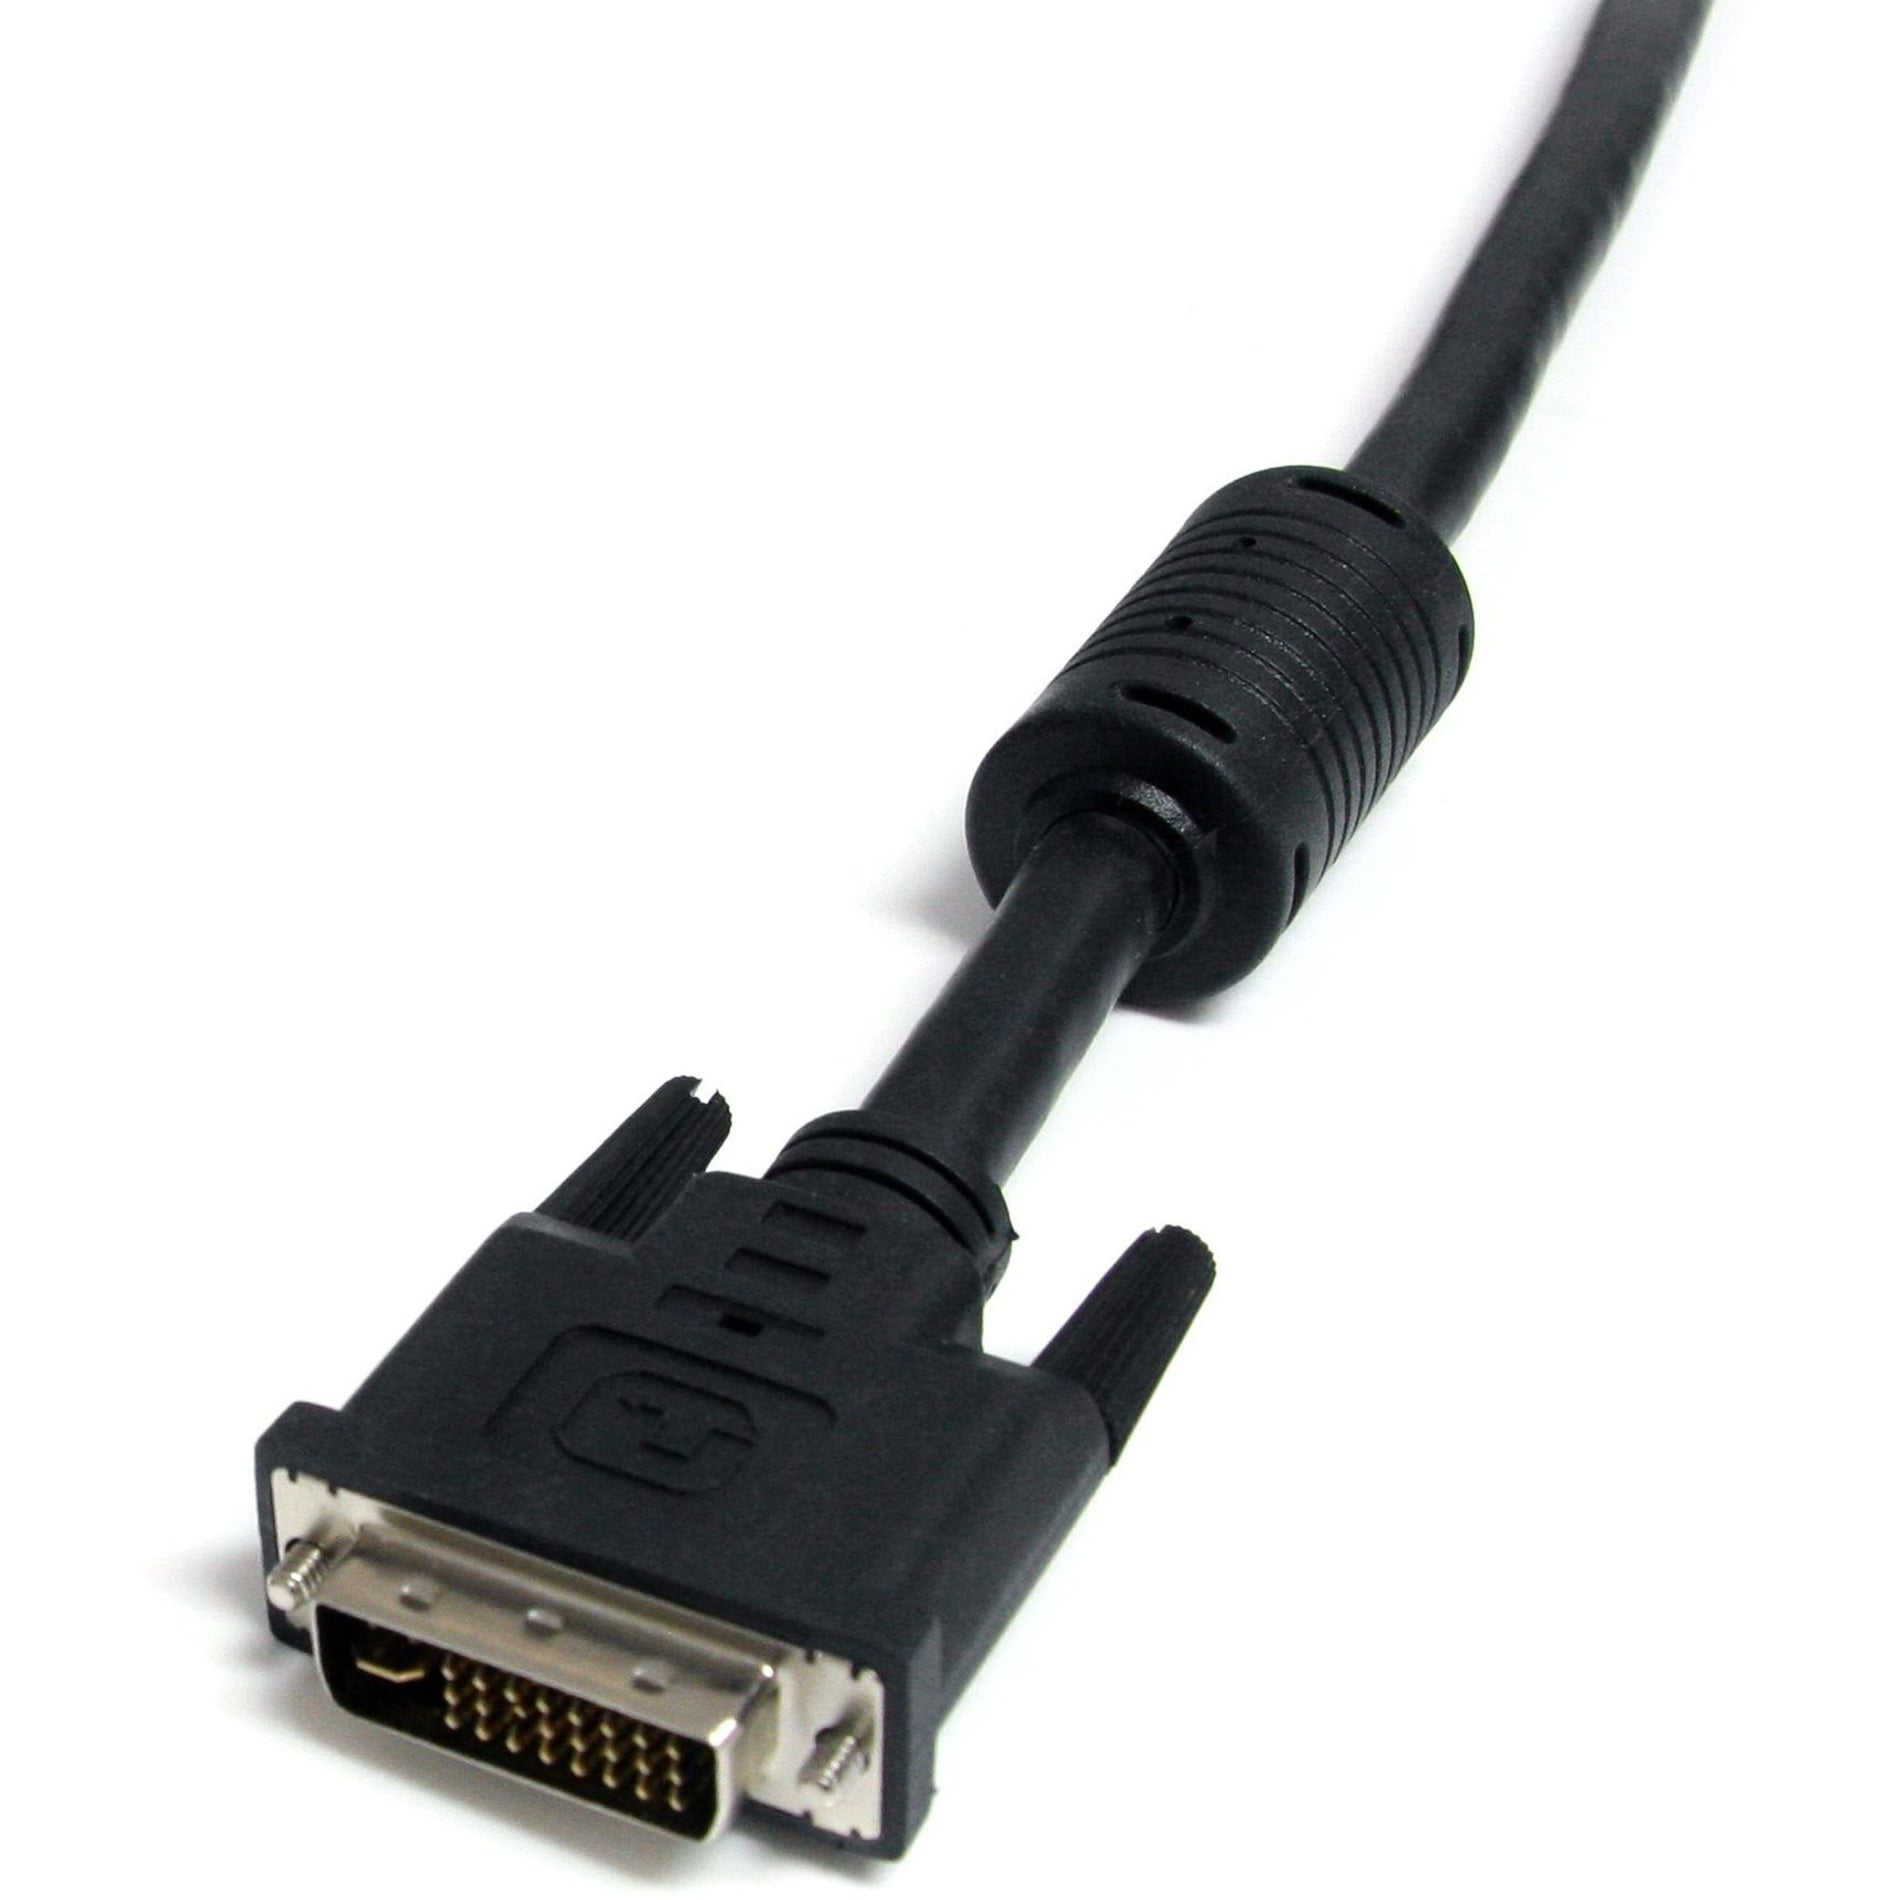 StarTech.com DVIIDMM6 6ft DVI-I Dual Link Monitor Cable - M/M, EMI Protection, 9.9 Gbit/s Data Transfer Rate, 2560 x 1600 Supported Resolution